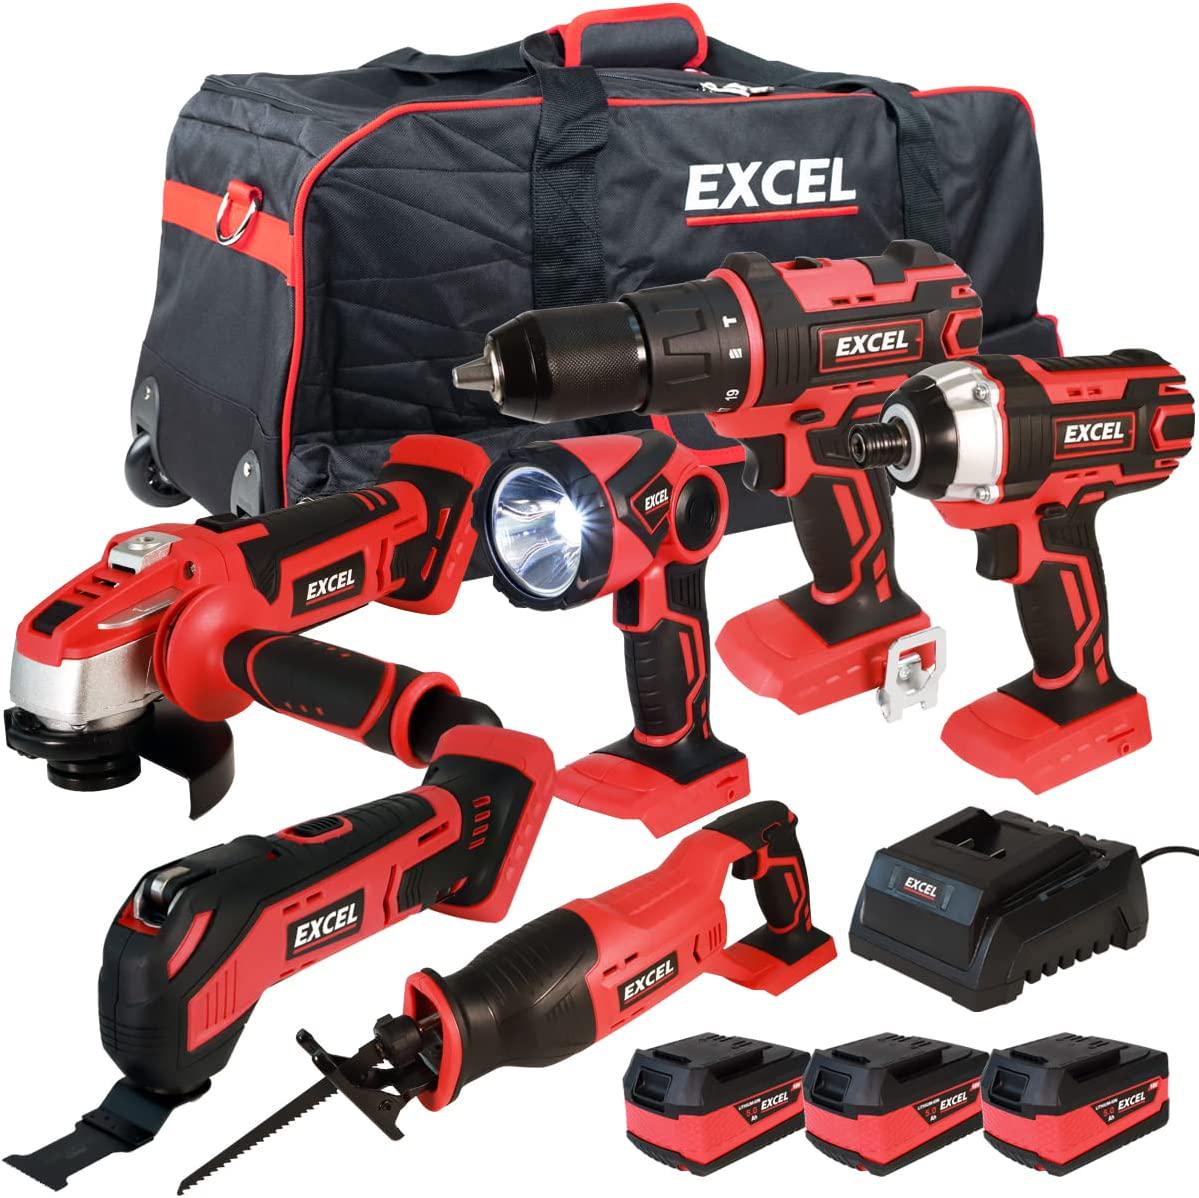 Excel, Excel 18V 6 Piece Cordless Li-ion Power Tool Kit with 3 x 5.0Ah Batteries and Charger in Bag EXL8939 - Monster Power Tool Kit - Combo Kit - 18V Cordless Power Tool Kits - Mega Power Tool